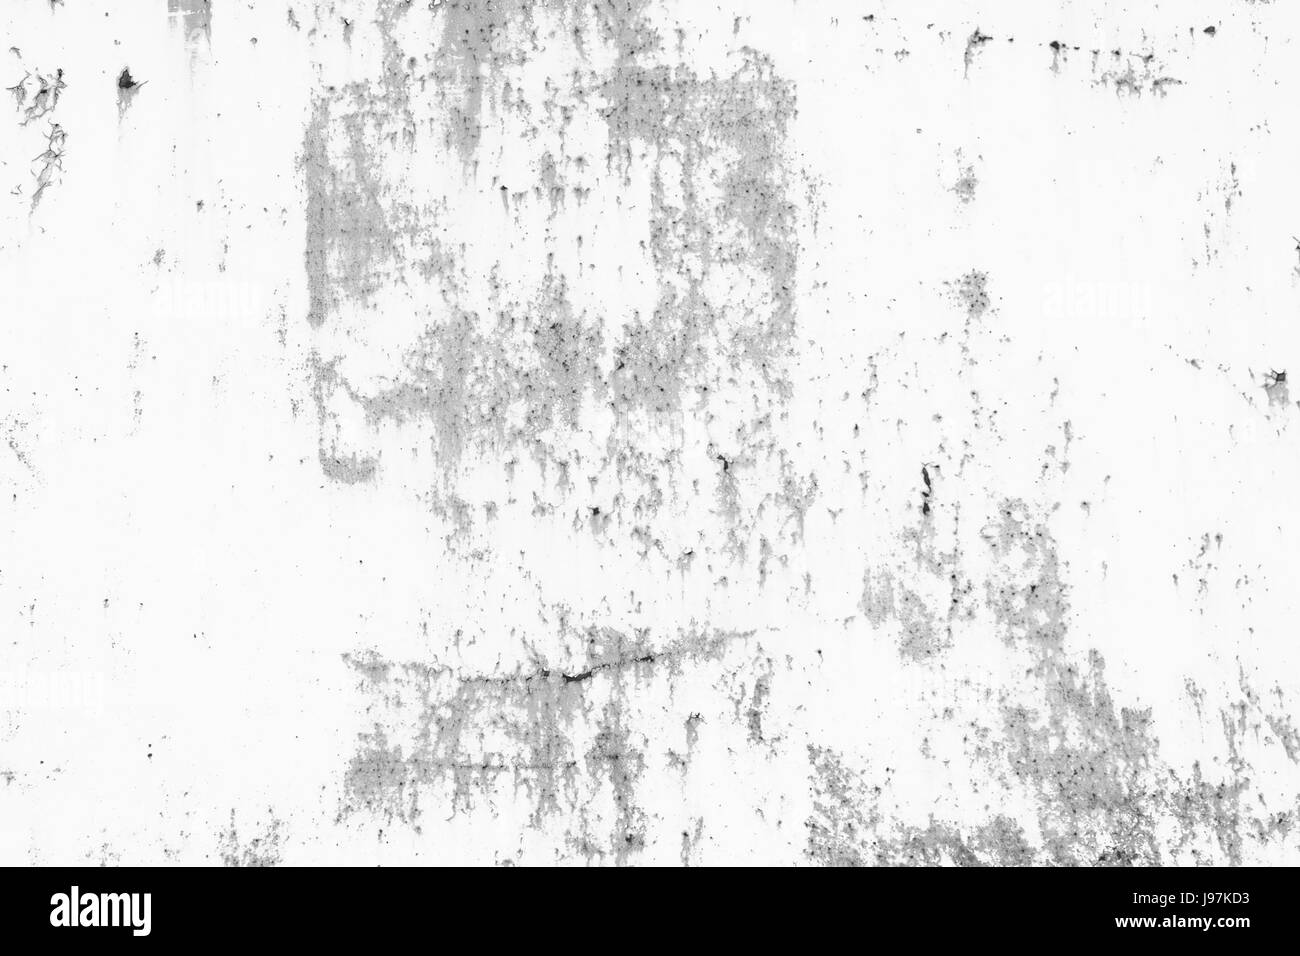 Rusted metal industrial distress background. Grunge black and white texture template for overlay artwork. Stock Photo